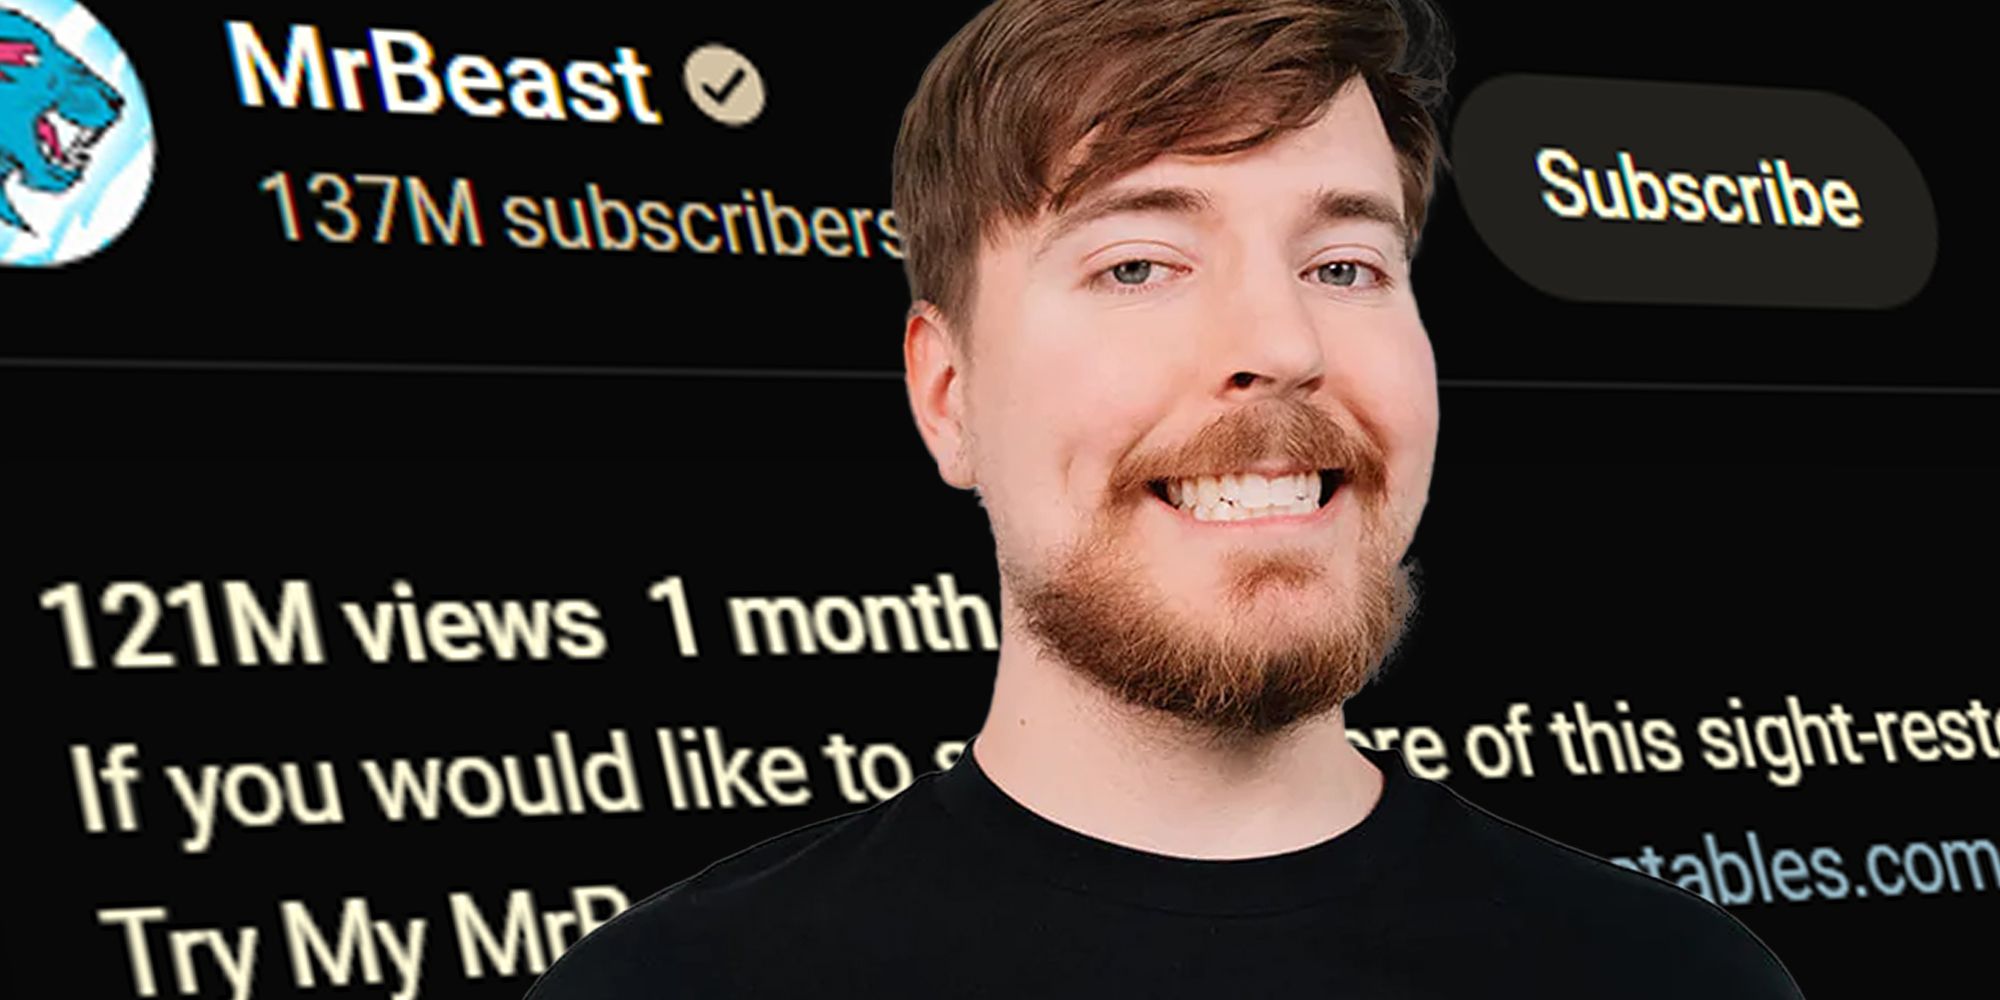 MrBeast's Philanthropy Is All For Publicity